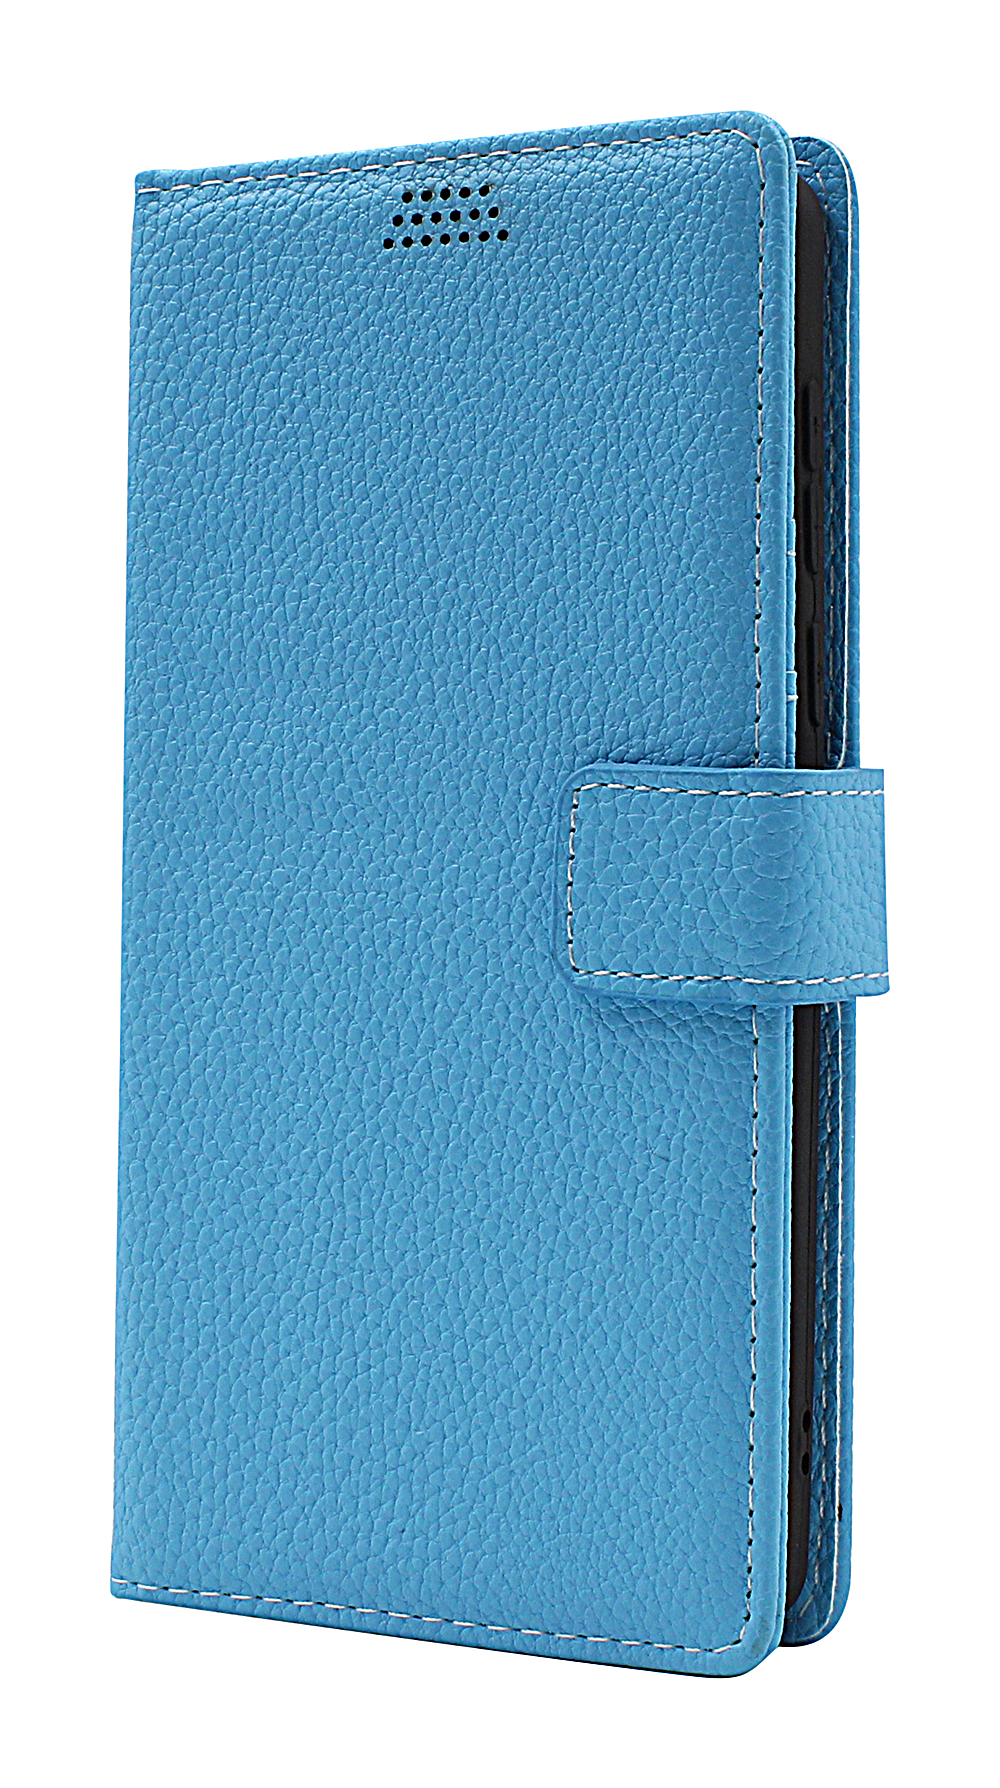 New Standcase Wallet Samsung Galaxy Note 9 (N960F/DS)